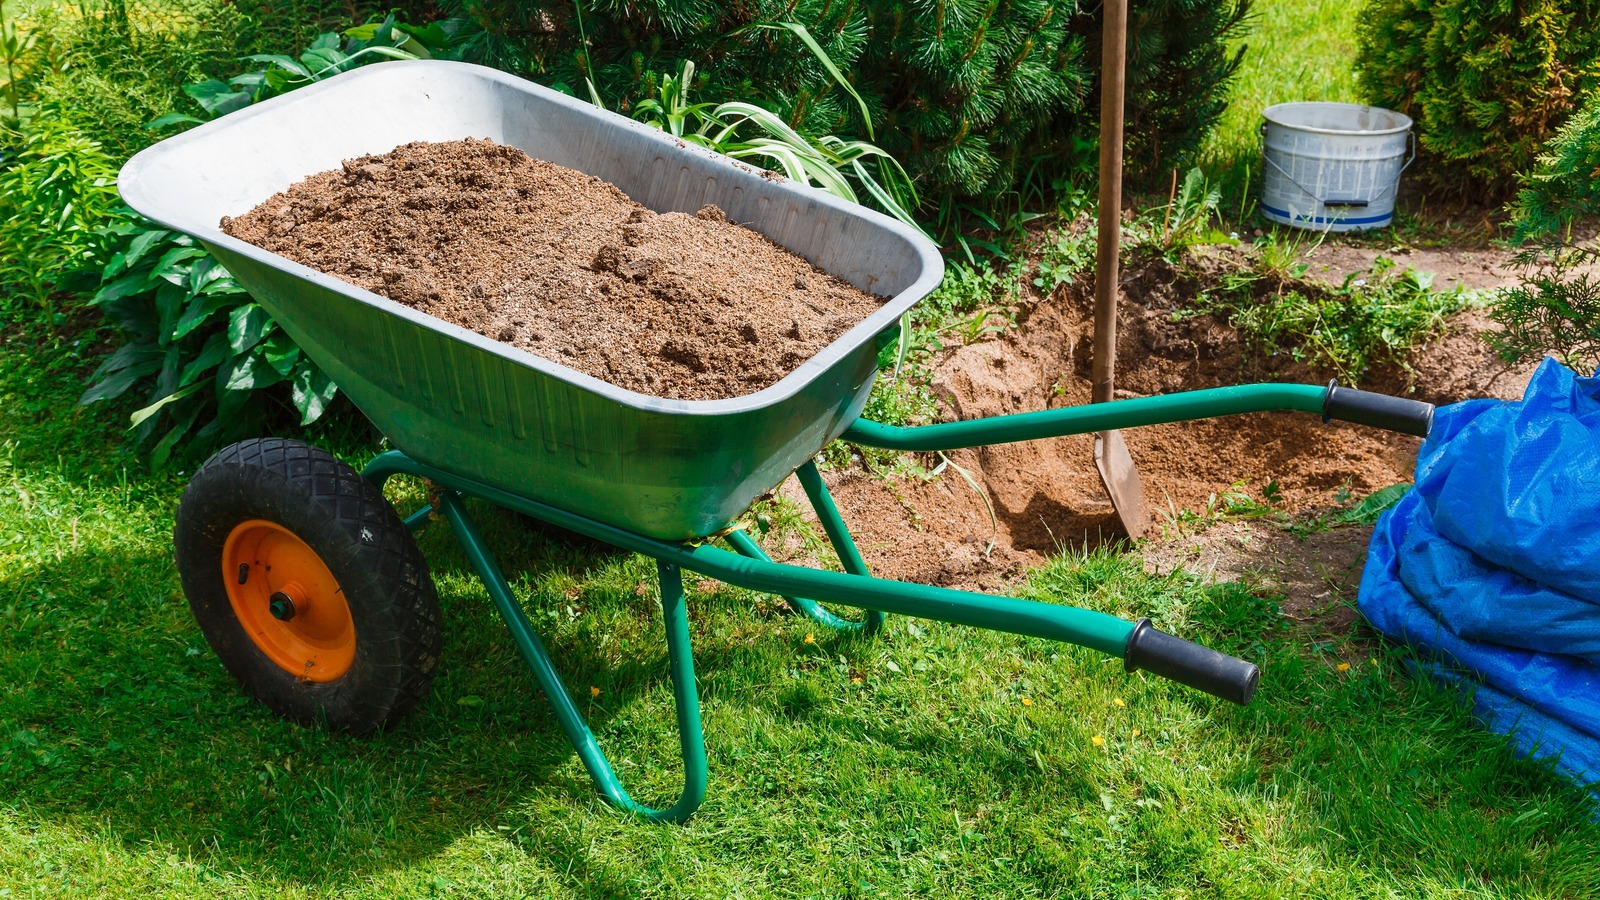 5 Clever Ways To Use Sand In Your Lawn And Garden